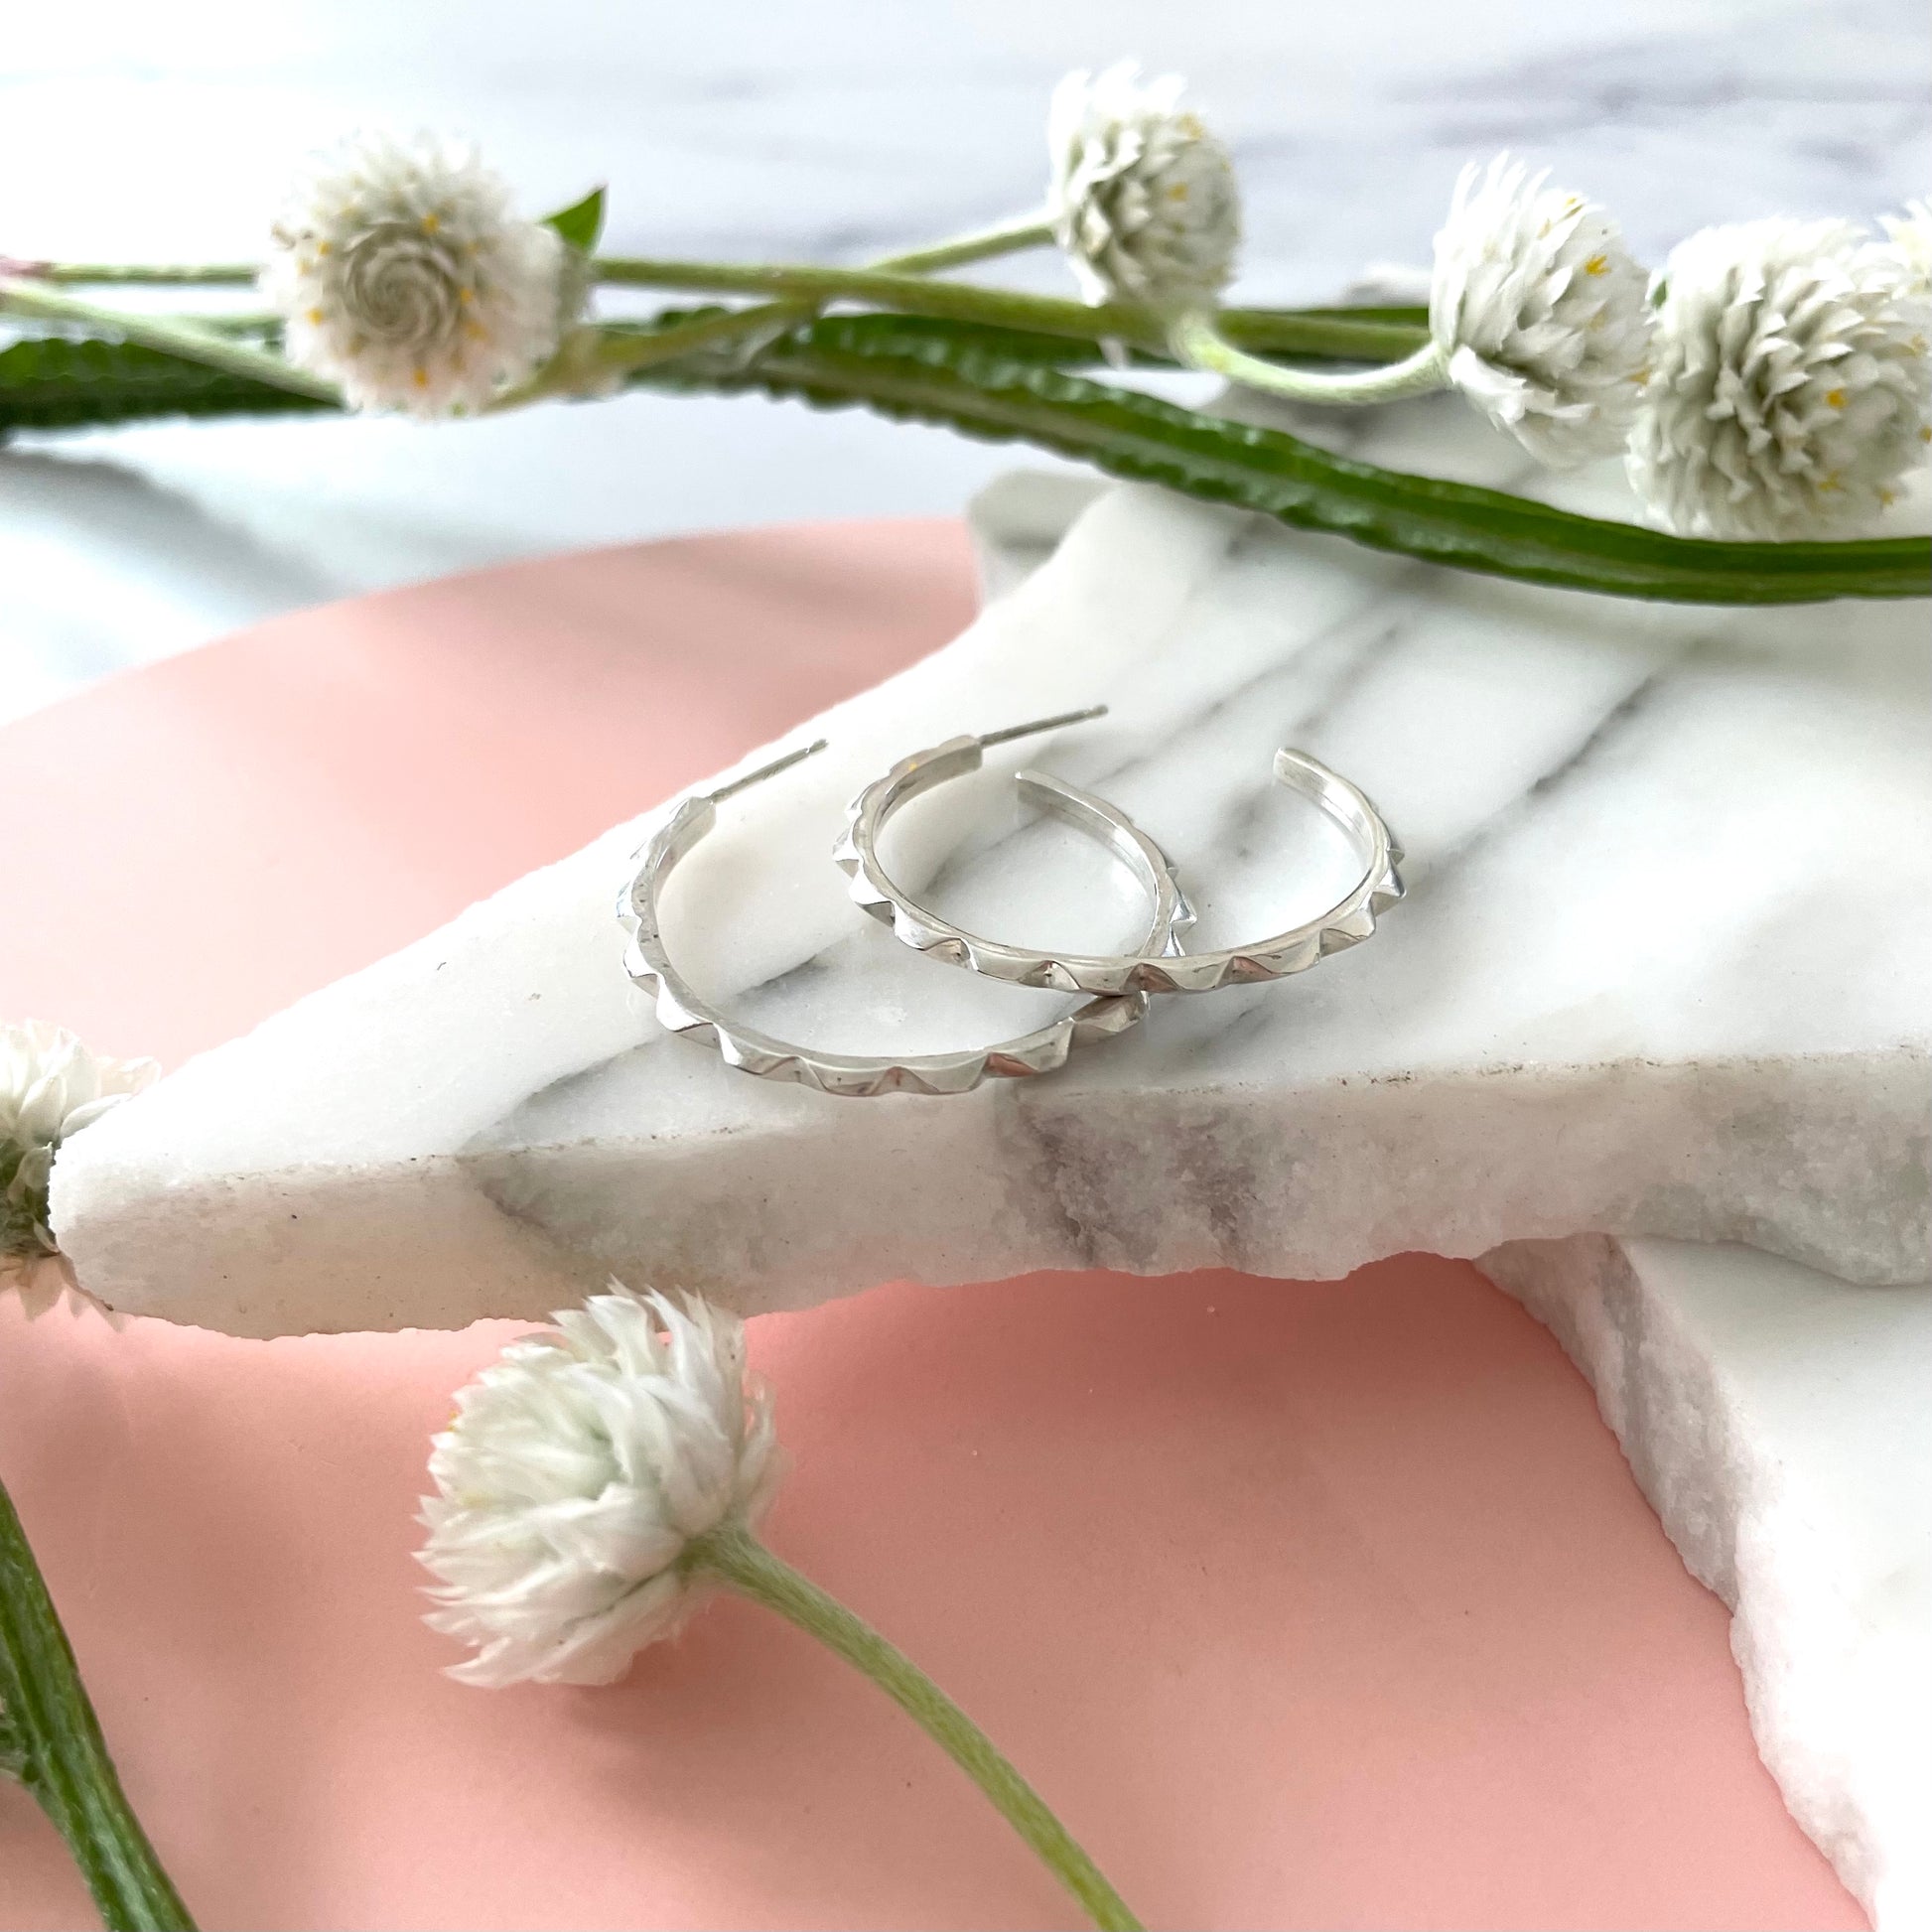 Handmade sterling silver hoop earrings on a marble displayed with a pink background and fresh flowers